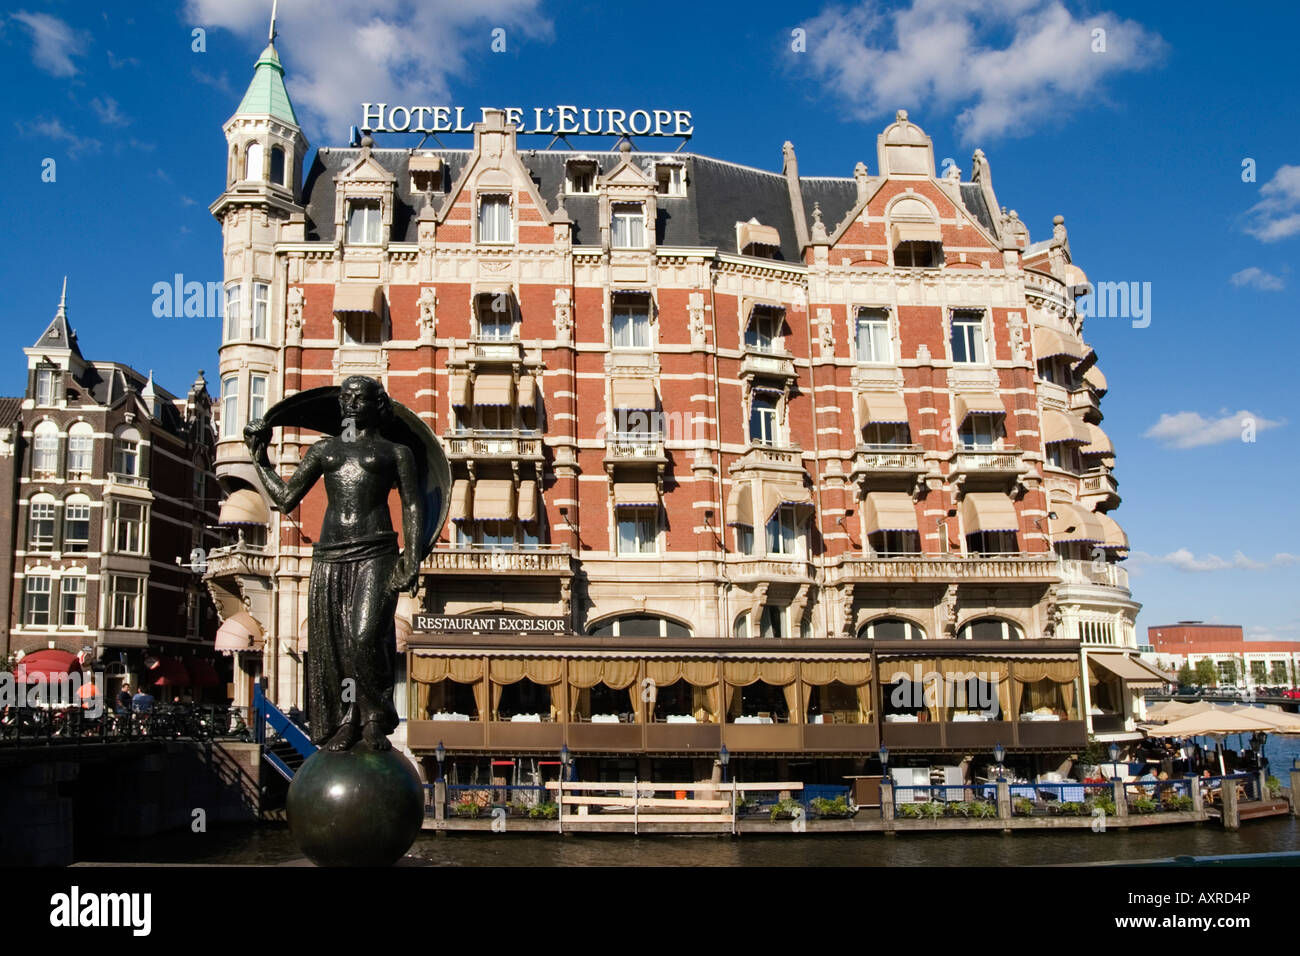 Amsterdam Hotel de l Europe canal schulpture canal boat Restaurant Exelsior Terasse Stock Photo